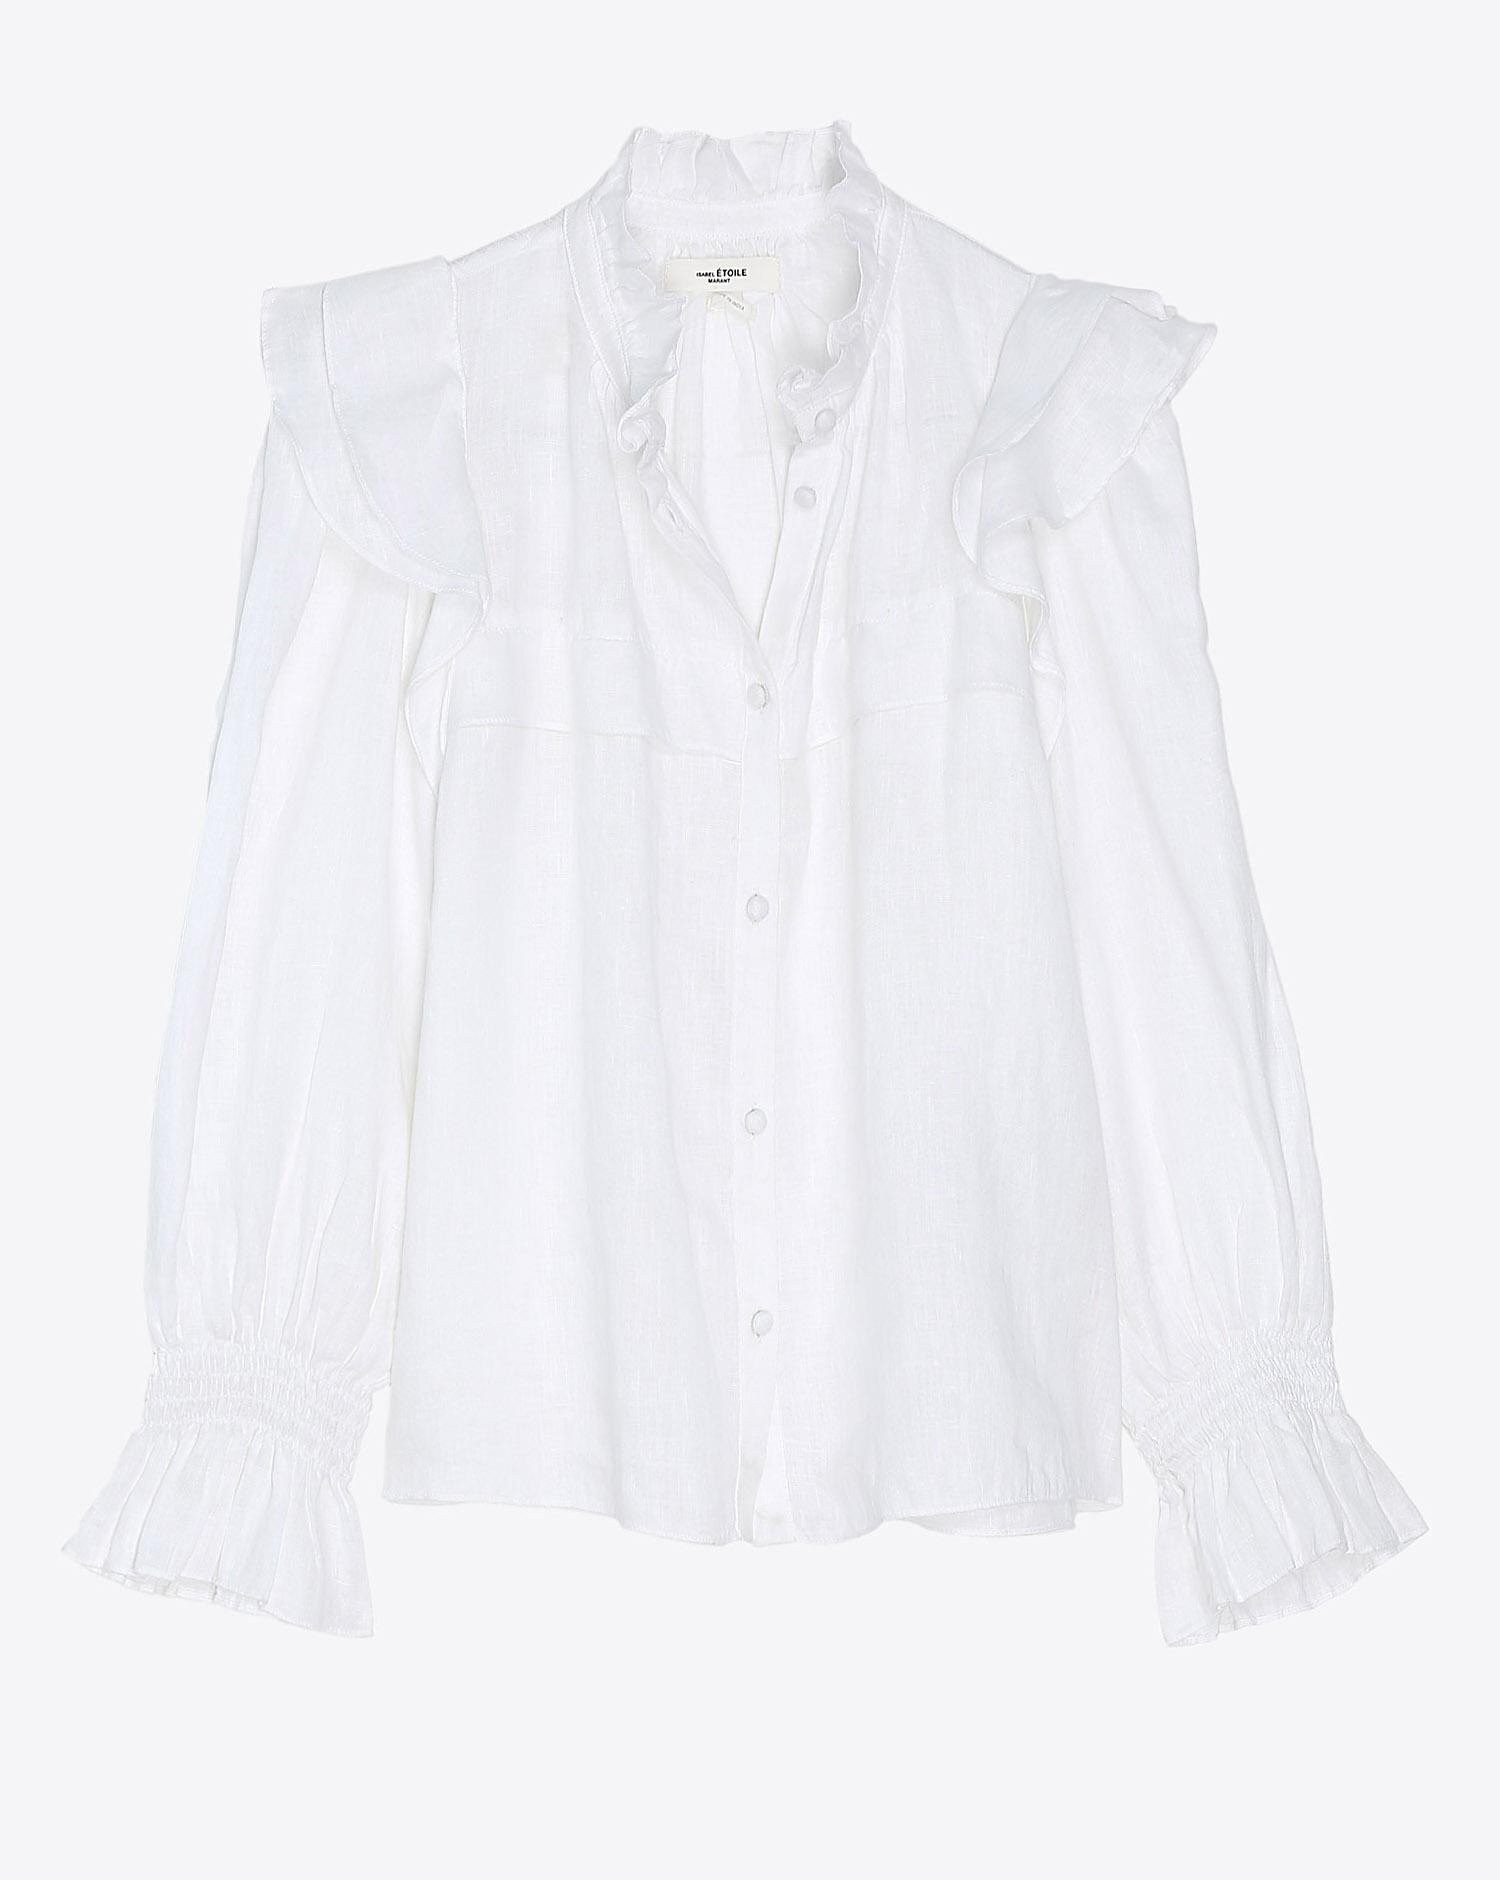 Étoile Isabel Marant Tedy Shirt in White — UFO No More